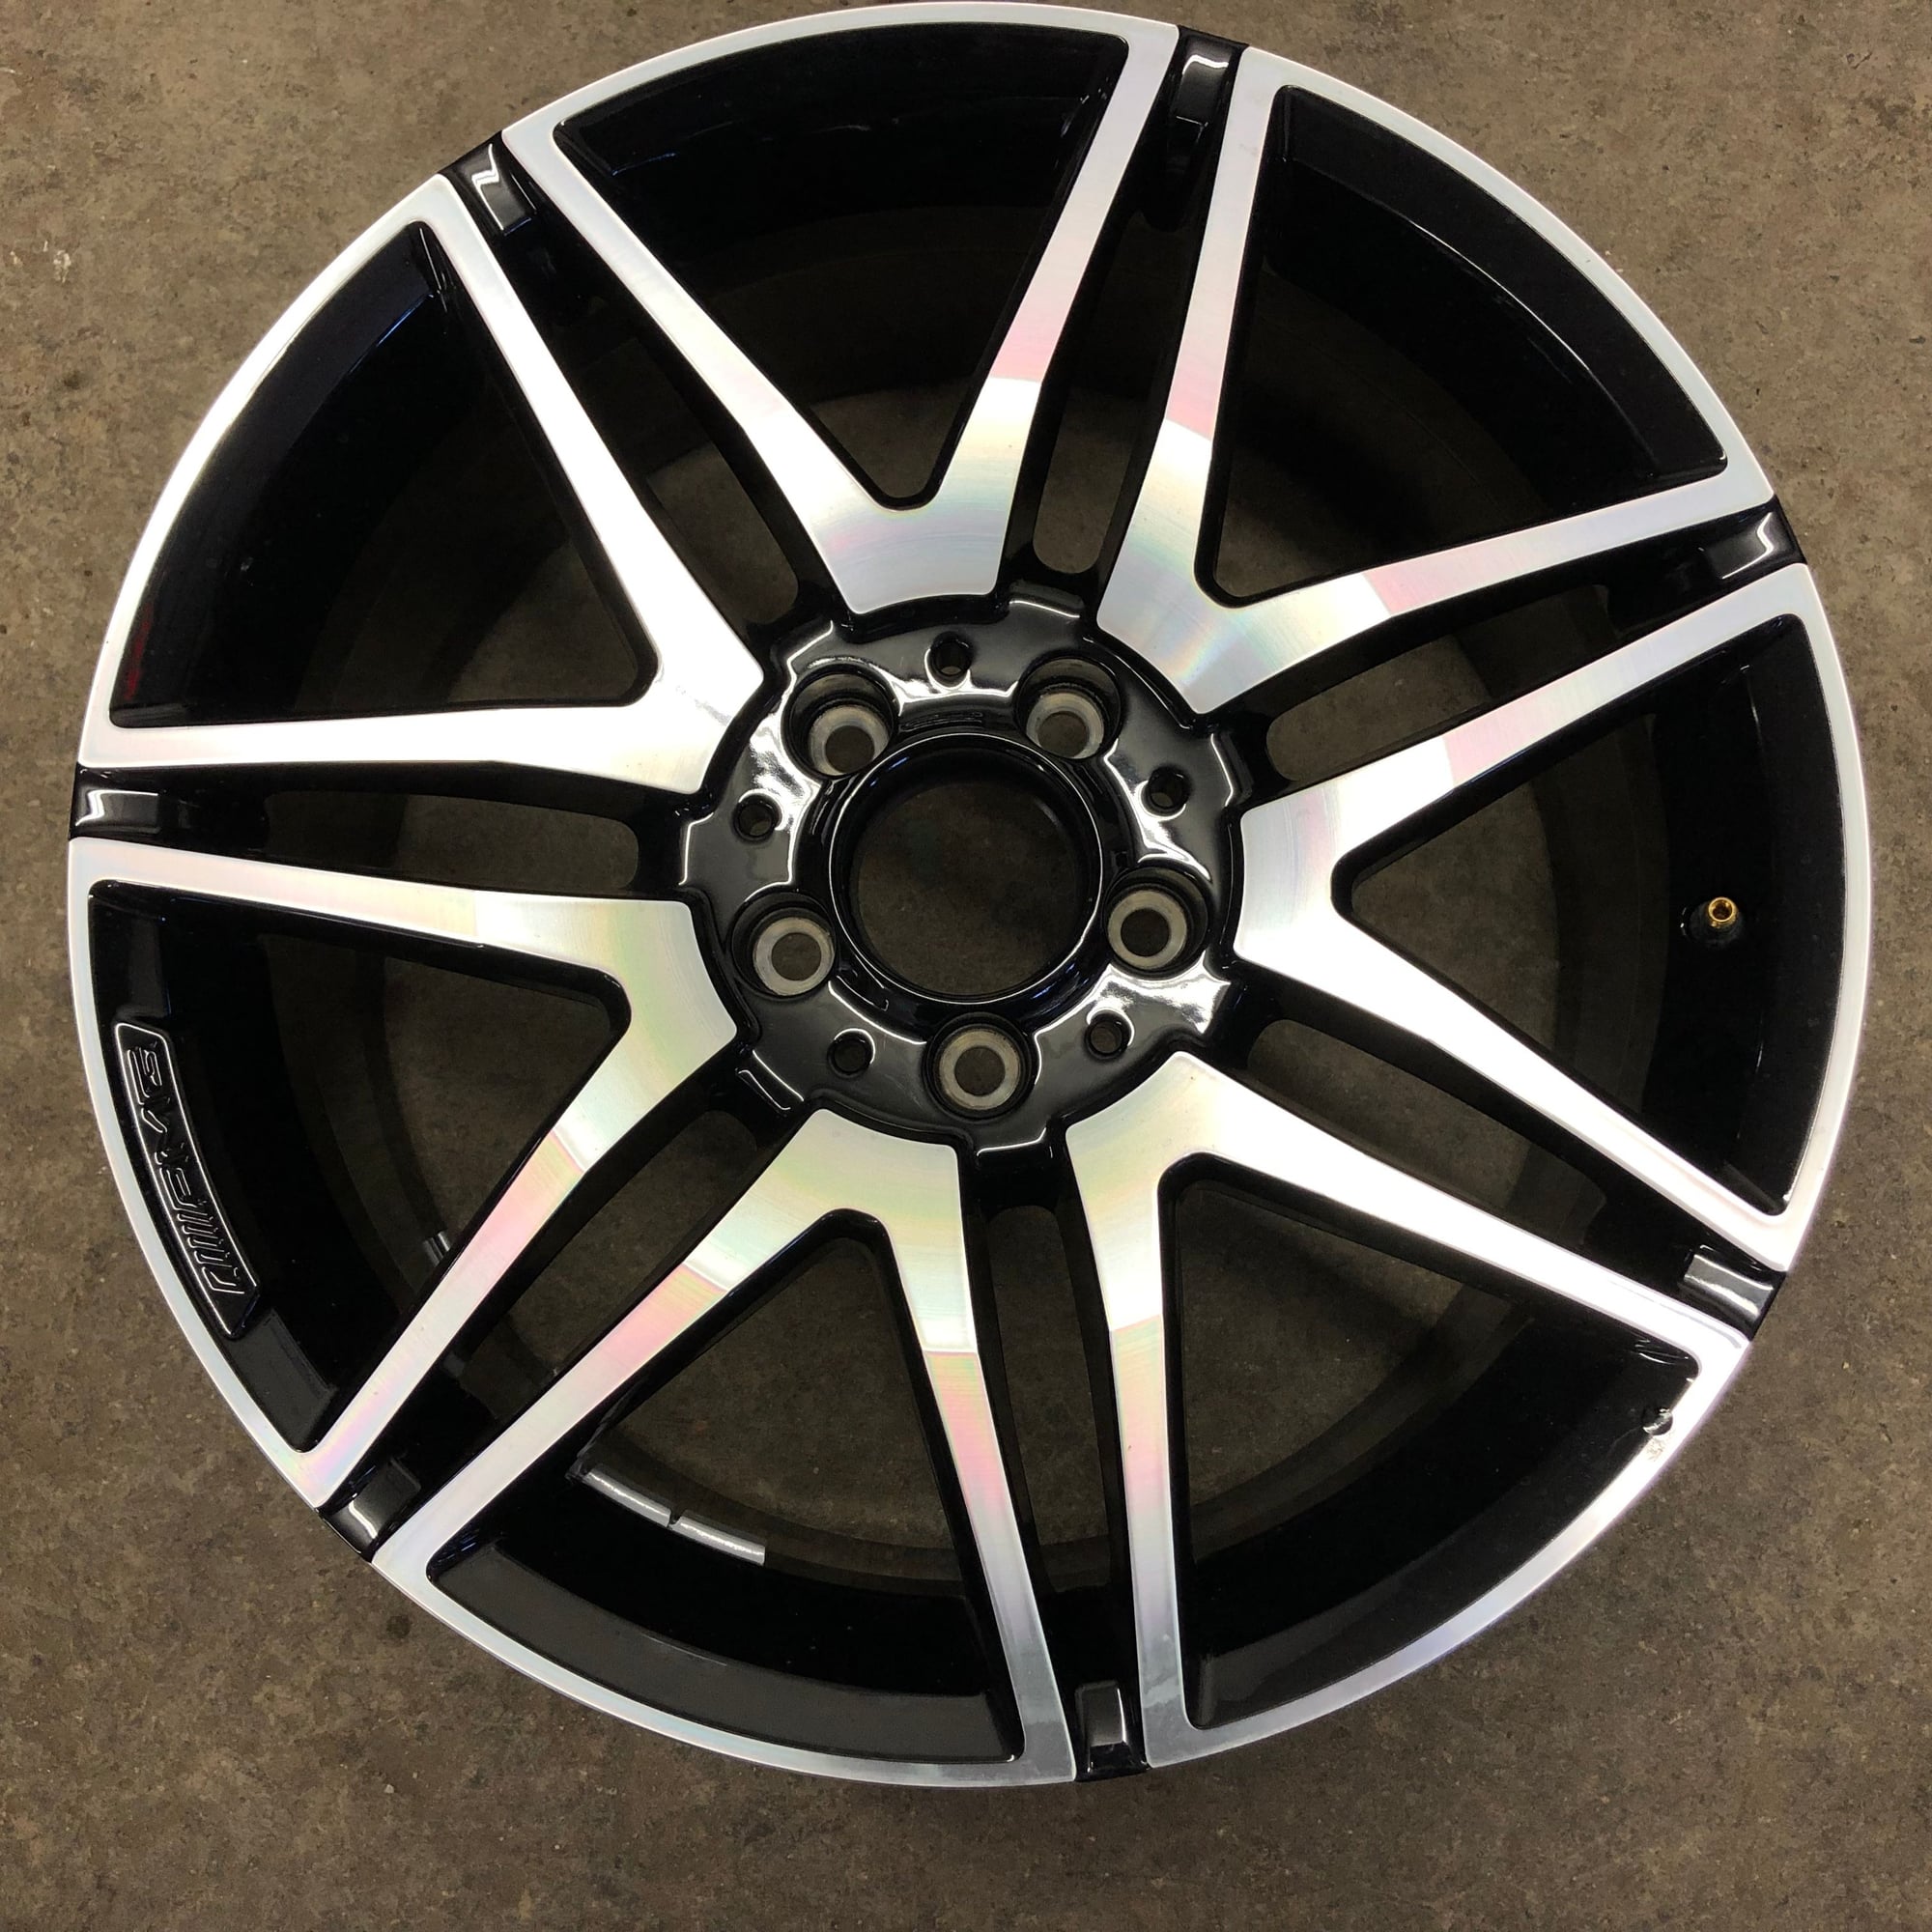 Wheels and Tires/Axles - 8x W204 C Class AMG Rims - Used - 2008 to 2014 Mercedes-Benz C300 - Frederick, MD 21703, United States